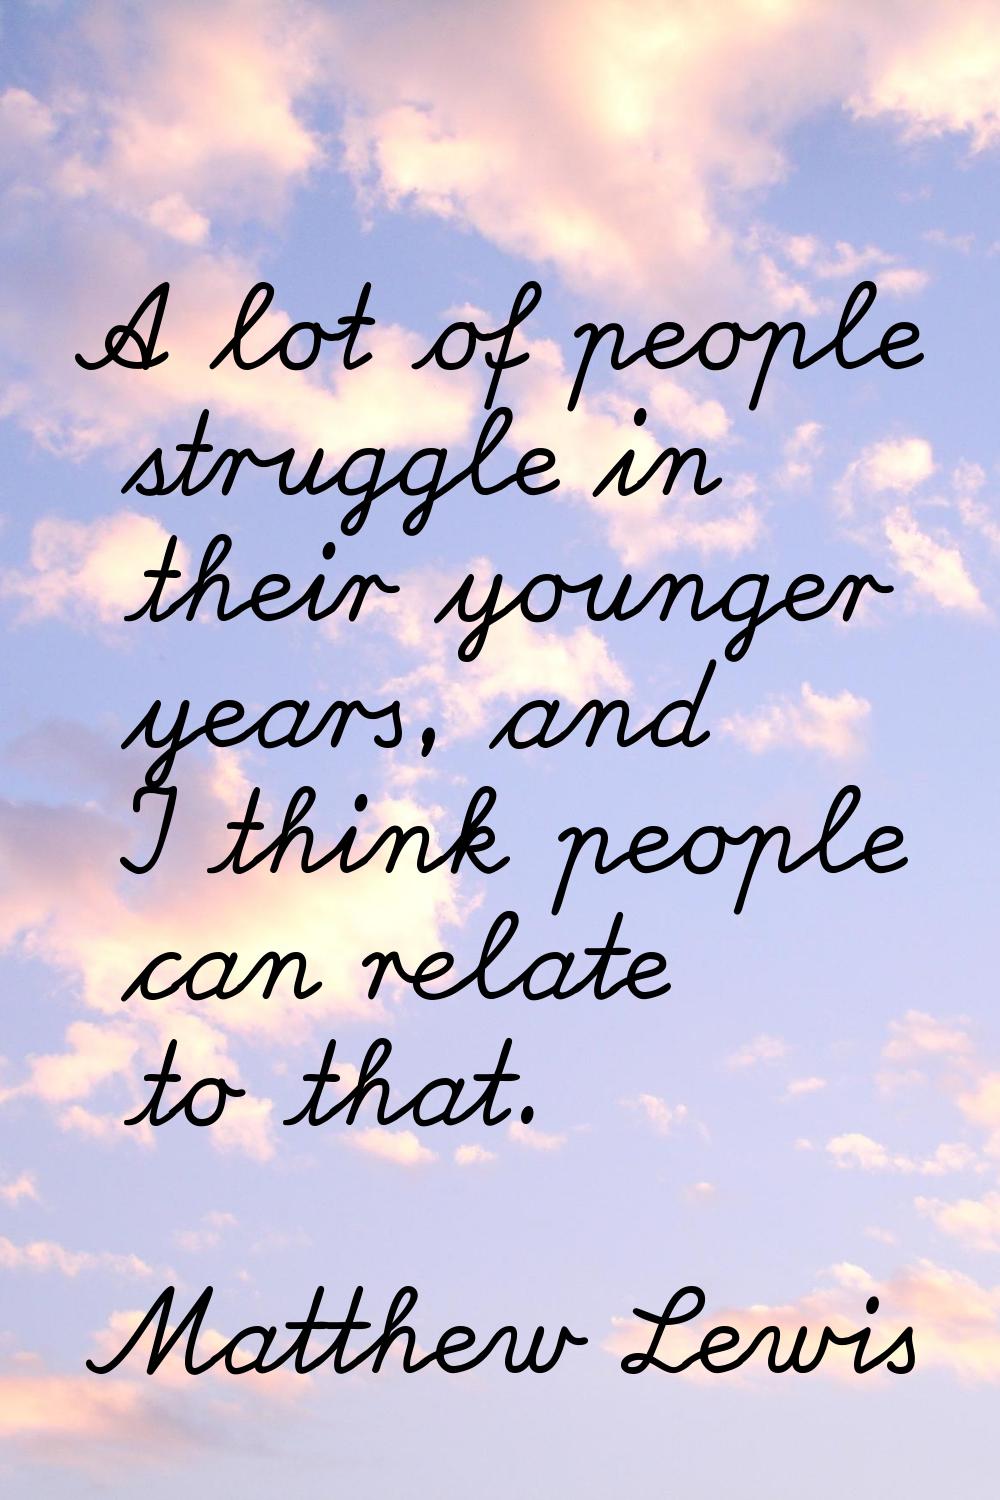 A lot of people struggle in their younger years, and I think people can relate to that.